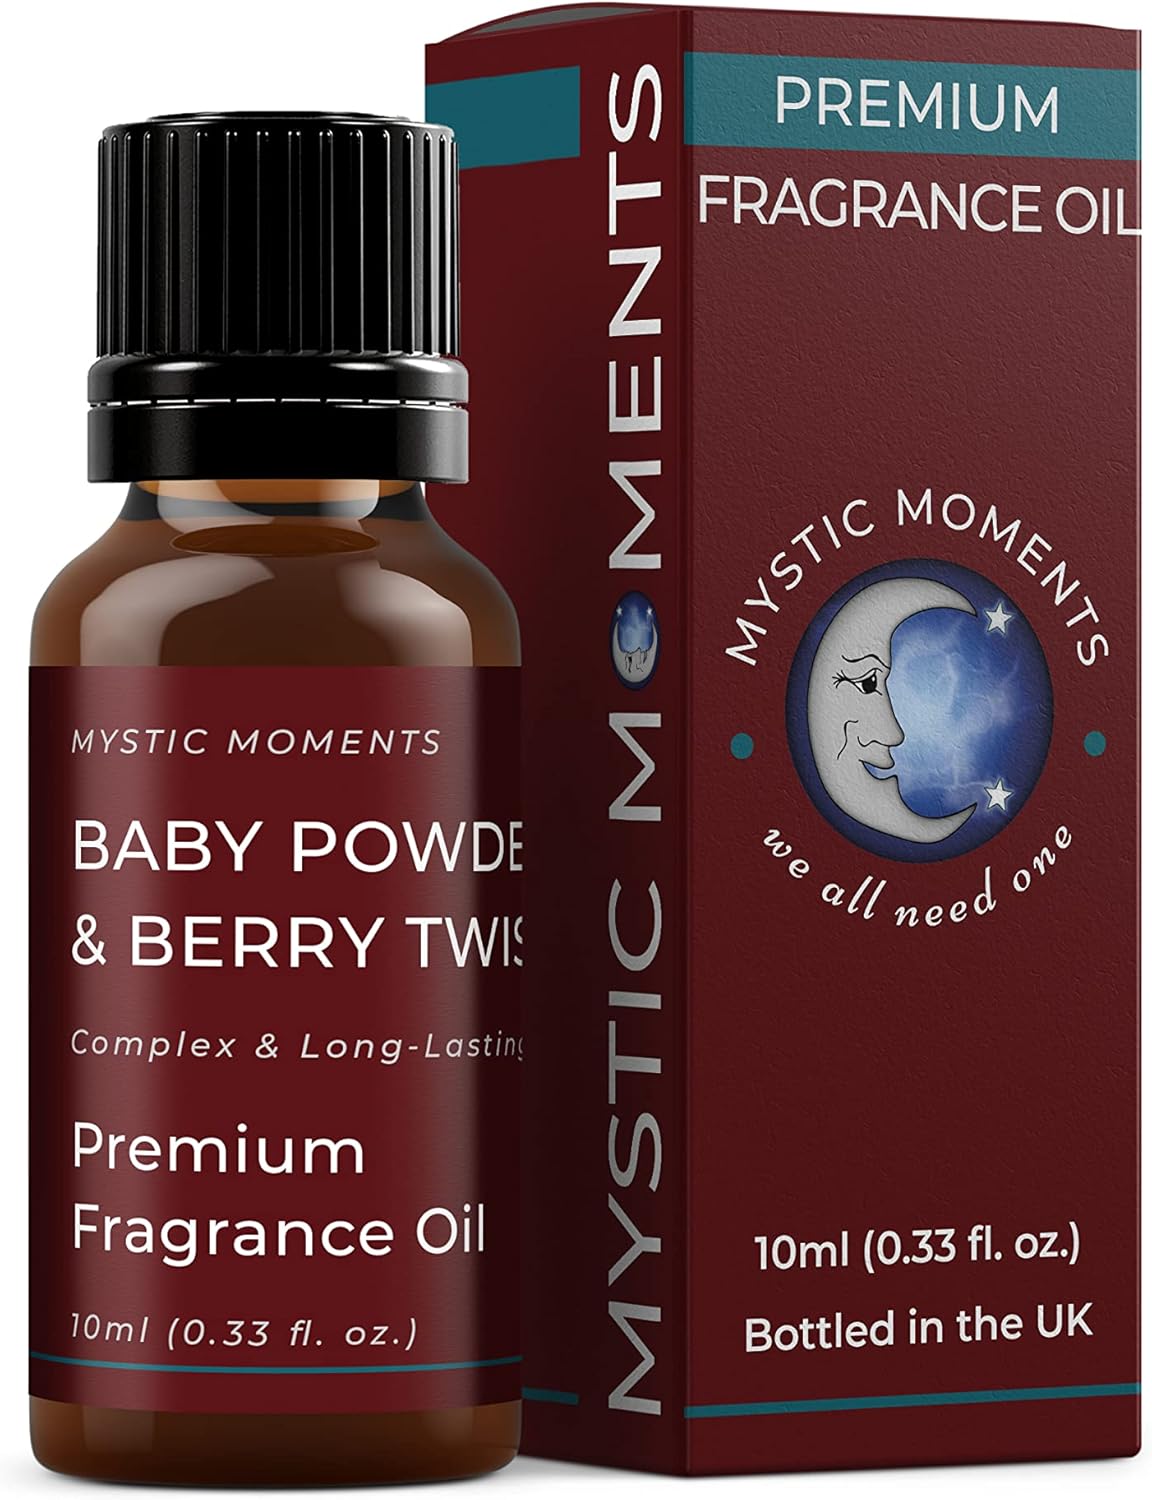 Mystic Moments | Baby Powder & Berry Twist Fragrance Oil - 10ml - Perfect for Soaps, Candles, Bath Bombs, Oil Burners, Diffusers and Skin & Hair Care Items